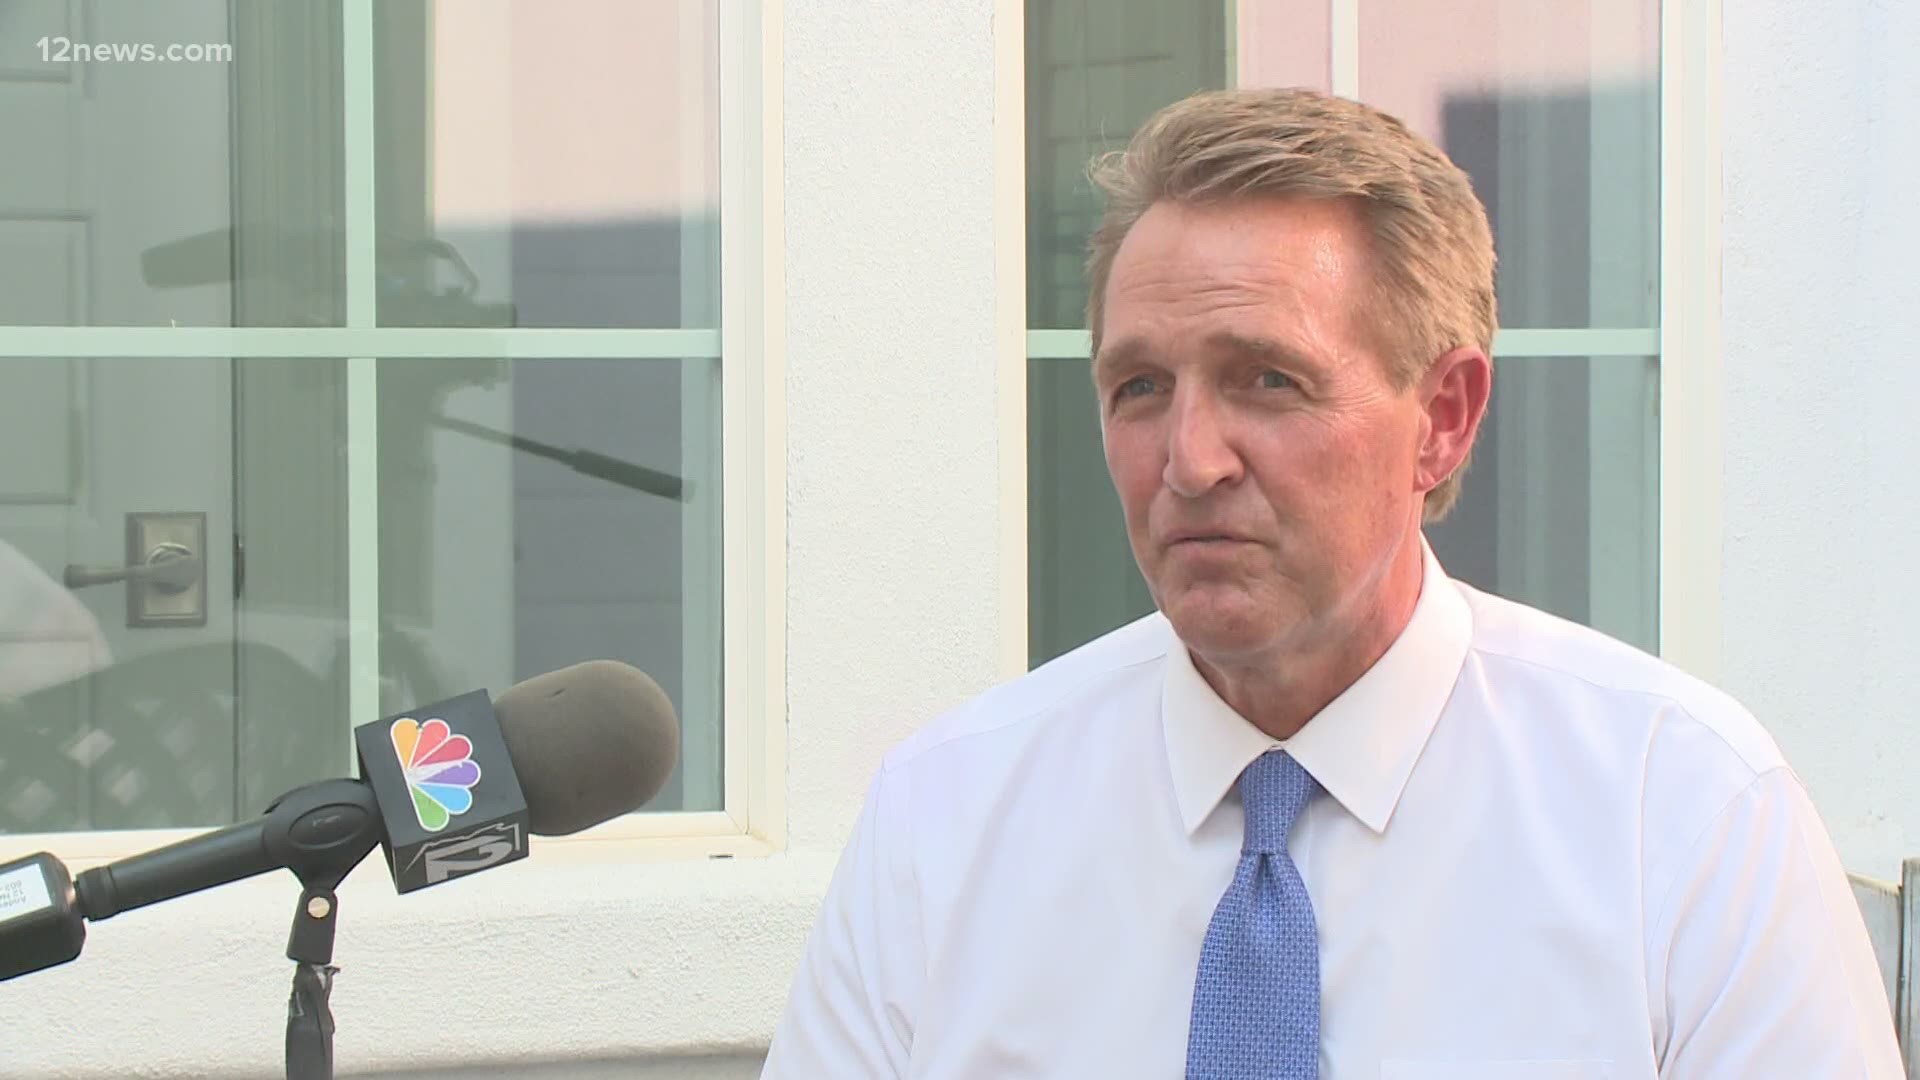 Former U.S. Senator Jeff Flake is one of more than two dozen Republican leaders to endorse Joe Biden for president. Flake says it was tactical and a long time coming